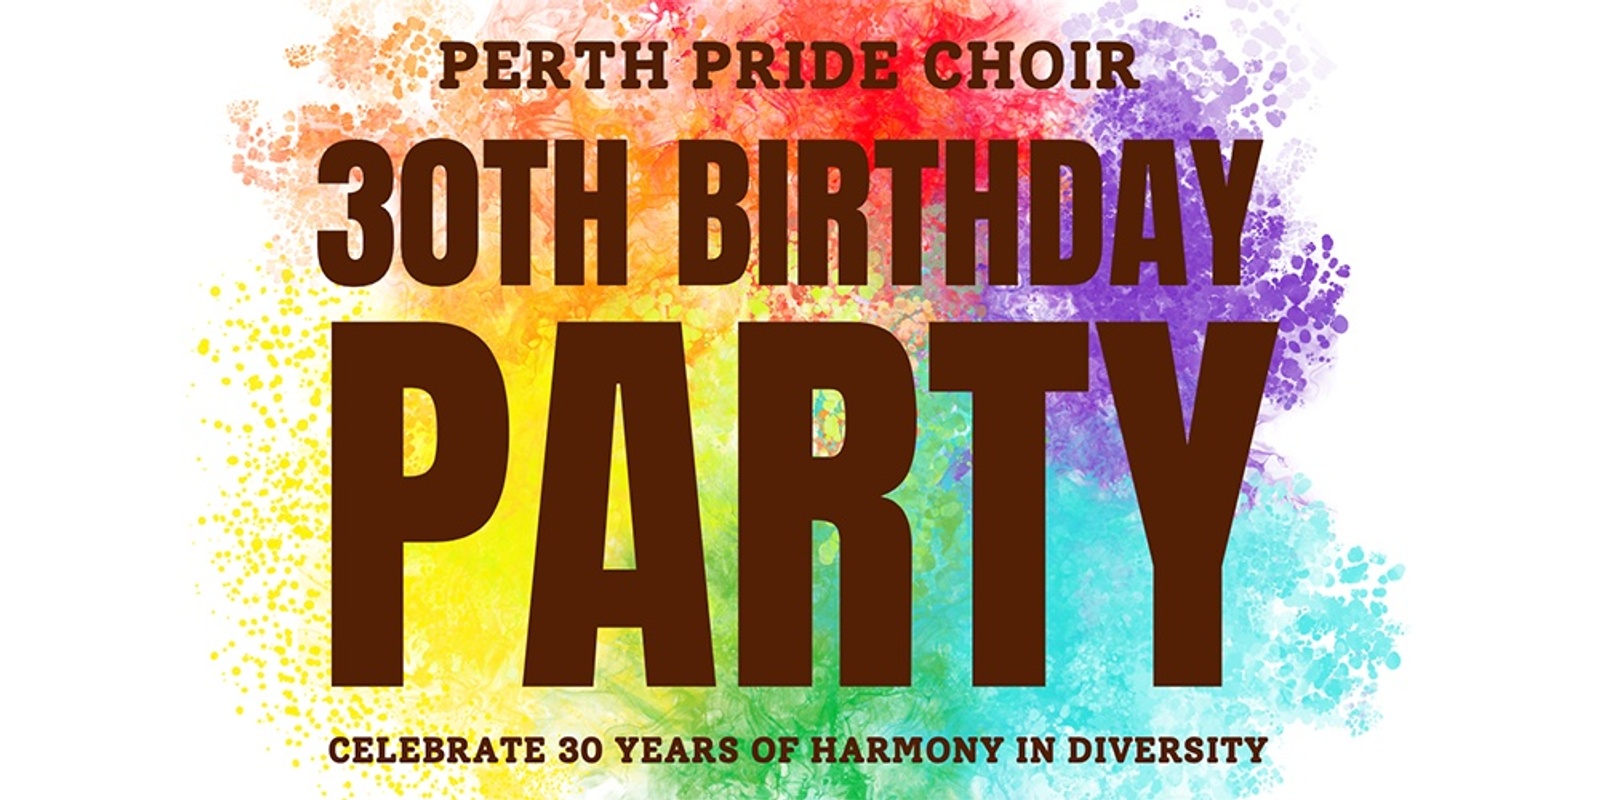 Banner image for Perth Pride Choir 30th Birthday Party